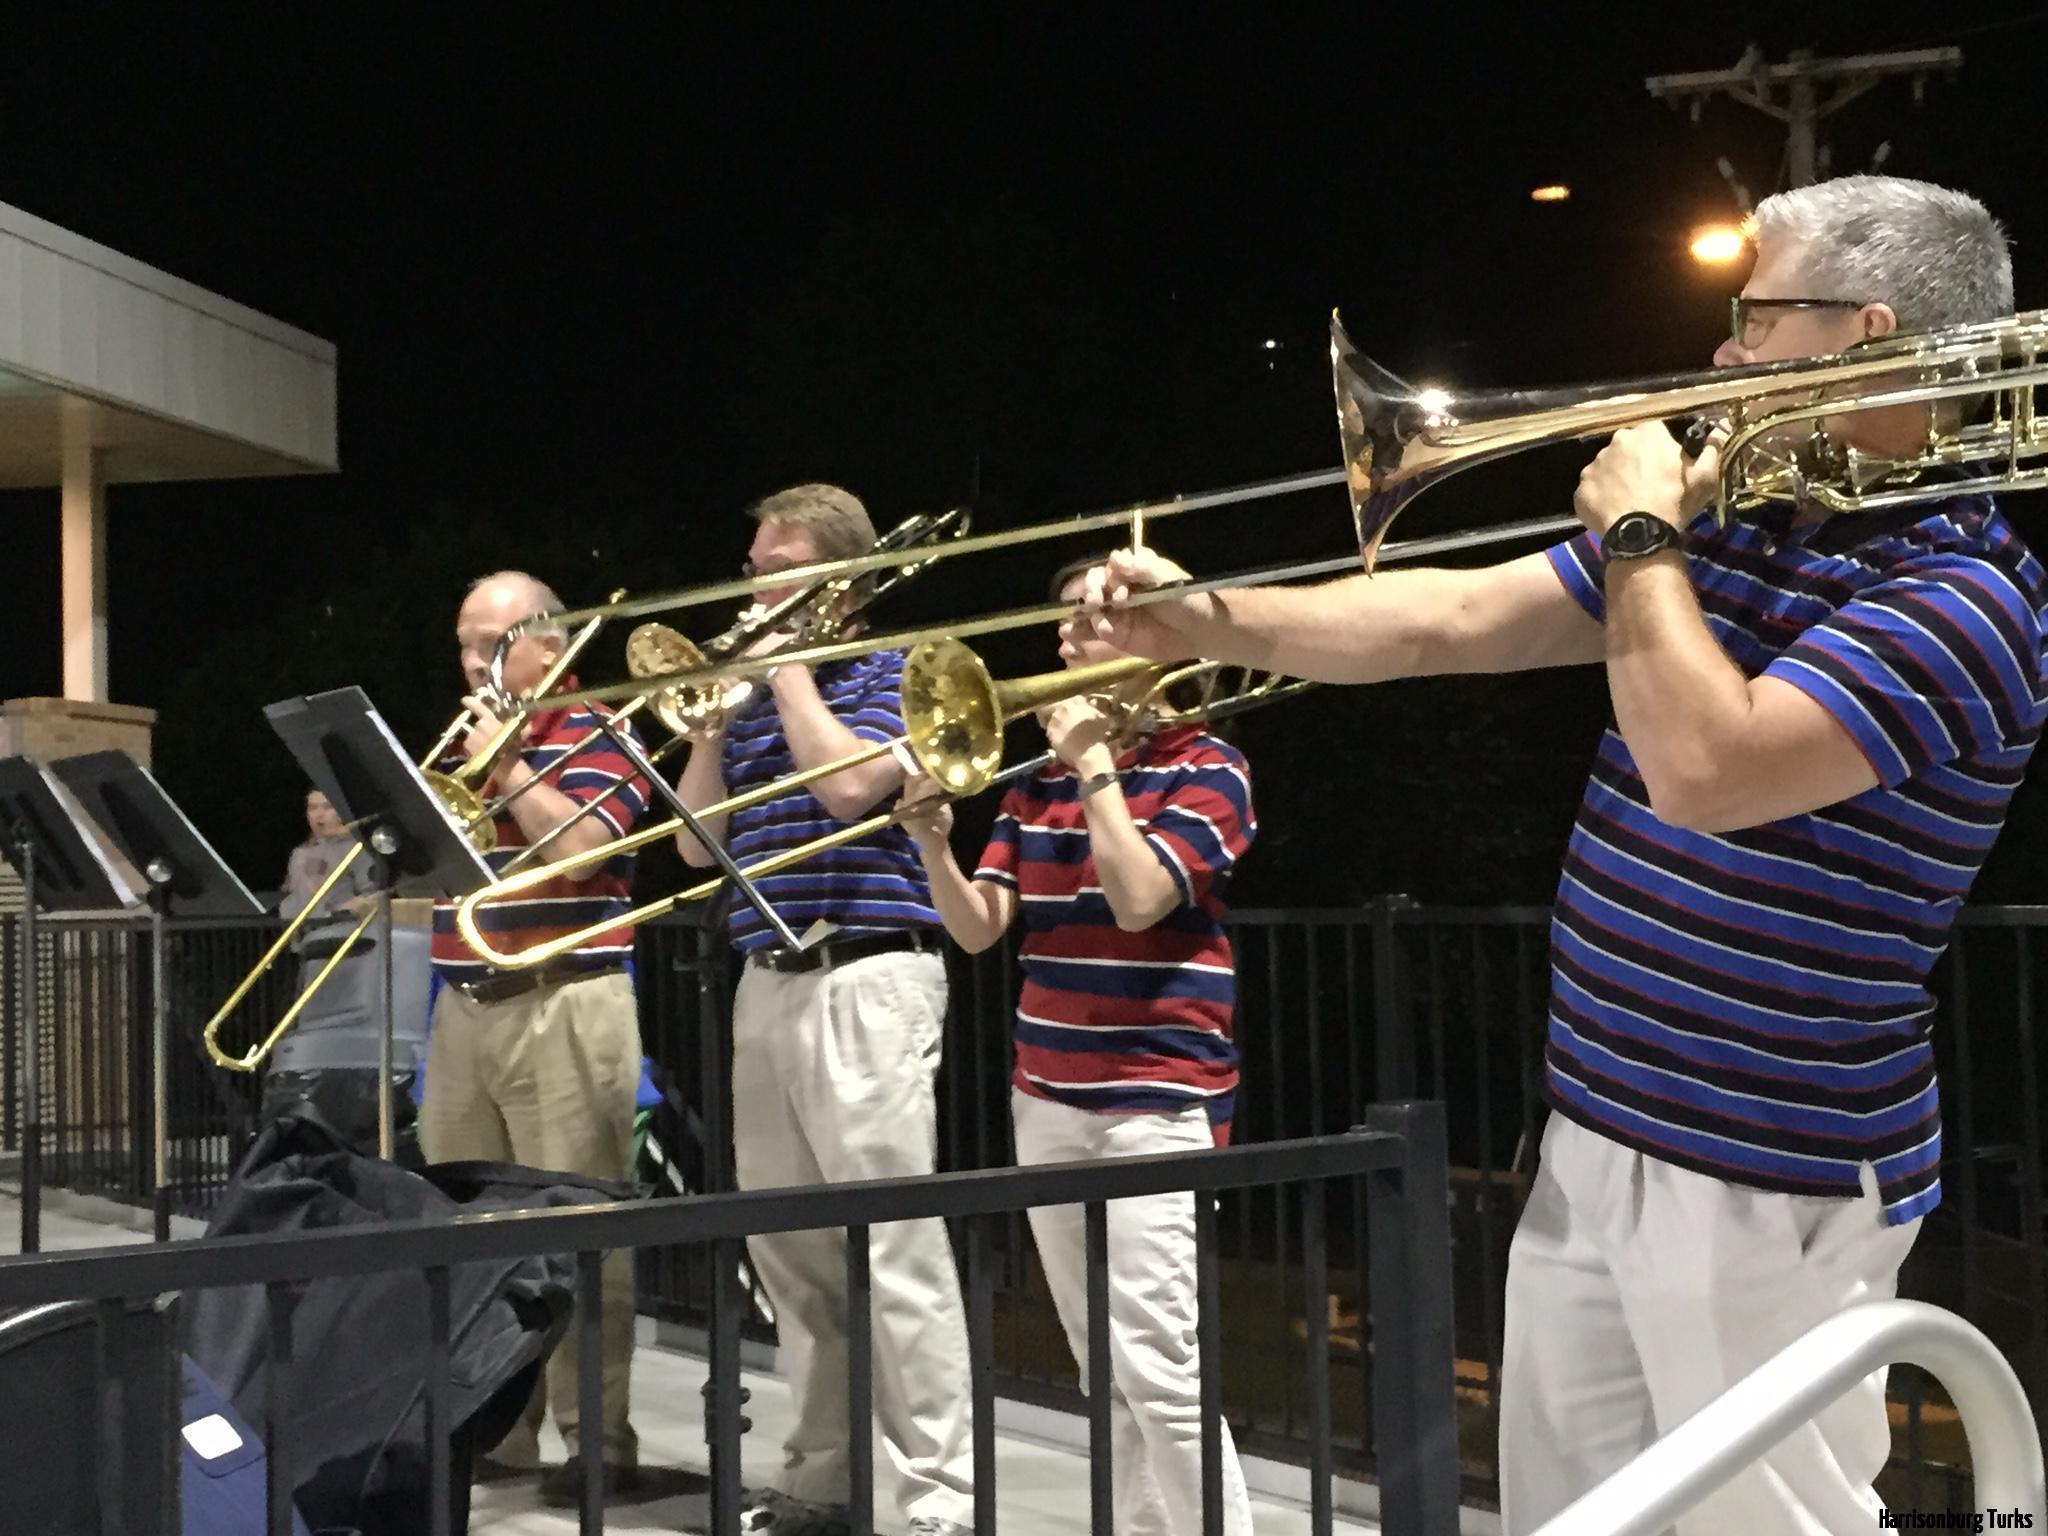 Mr. Jefferson's Bones playing Take Me Out to the Ballgame during the 7th Inning Stretch